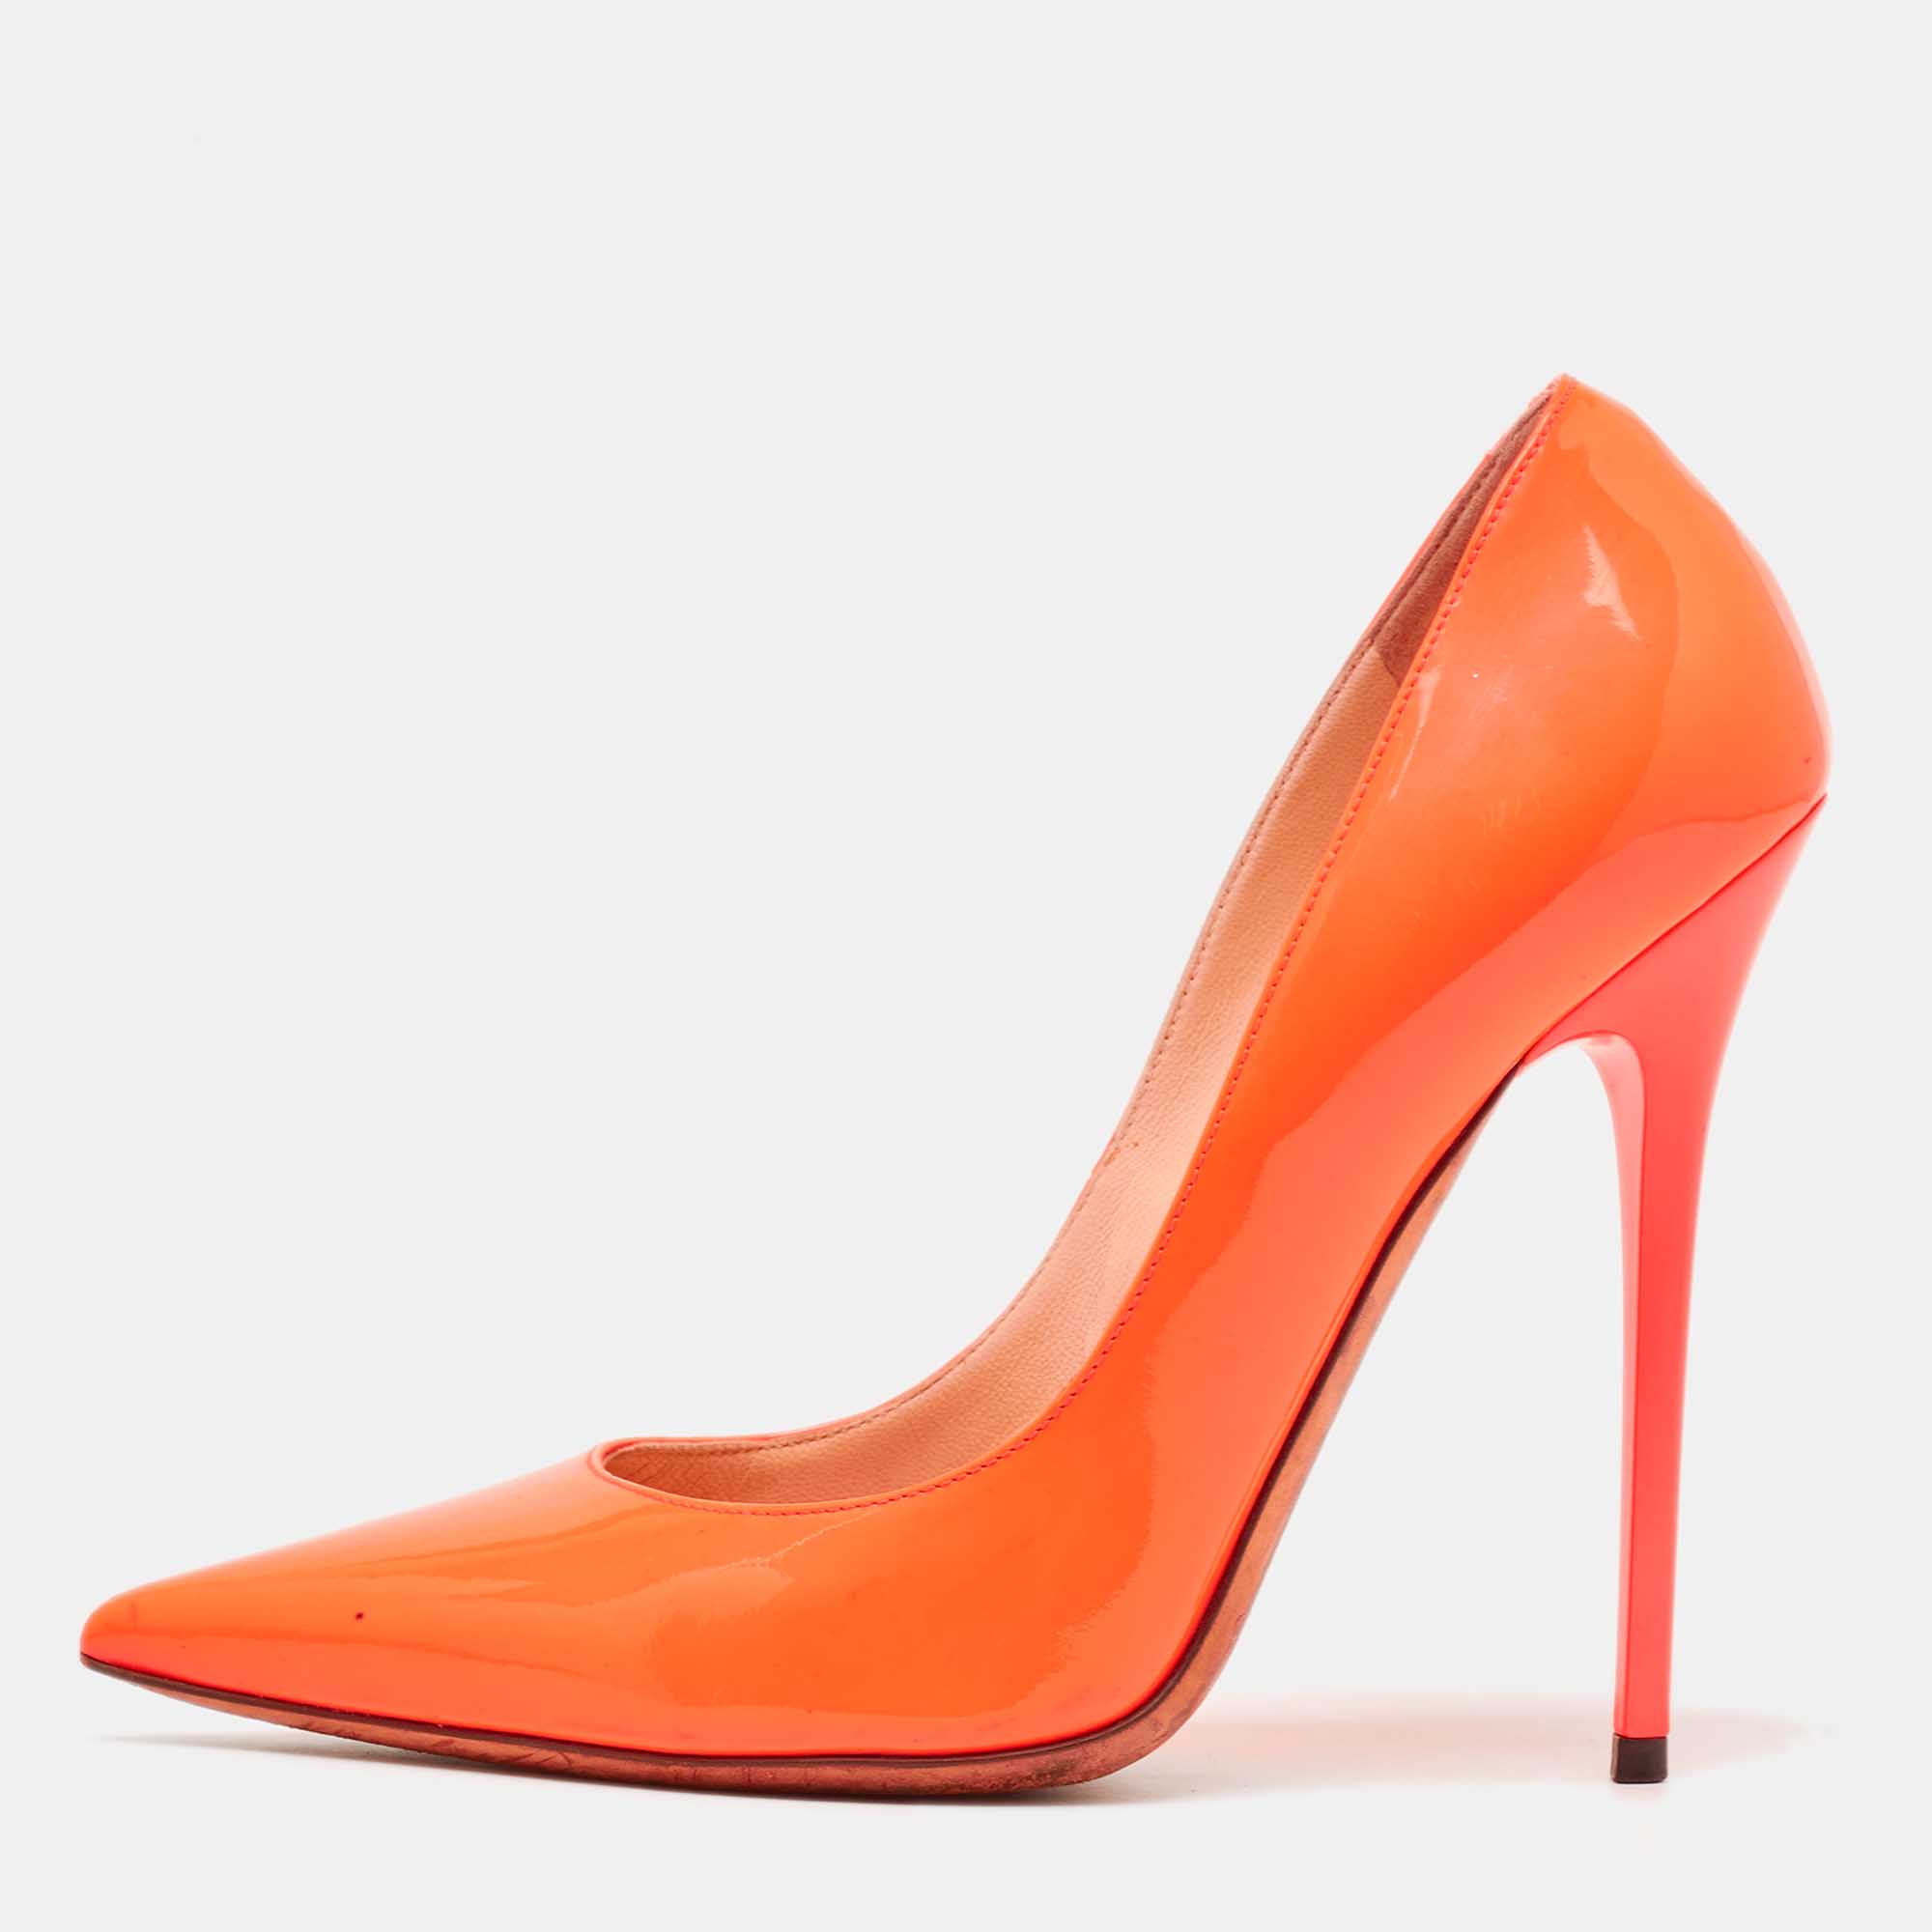 Jimmy choo orange patent leather pointed toe pumps size 37